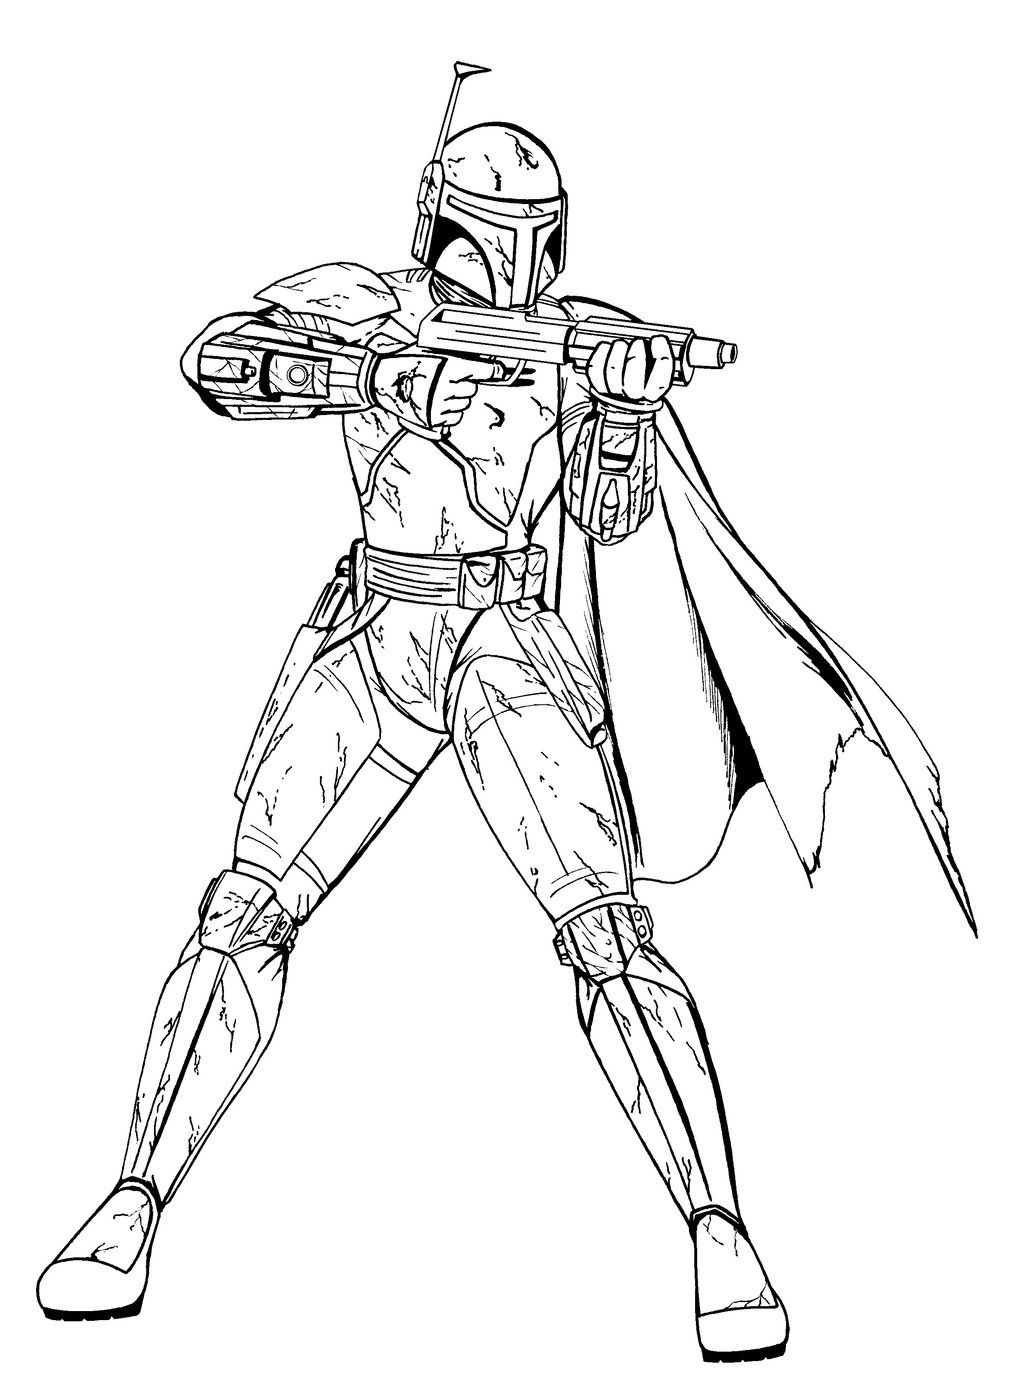 Star Wars Coloring Pages - Free Printable Star Wars Coloring bei Star Wars Bilder Zum Ausmalen Gratis